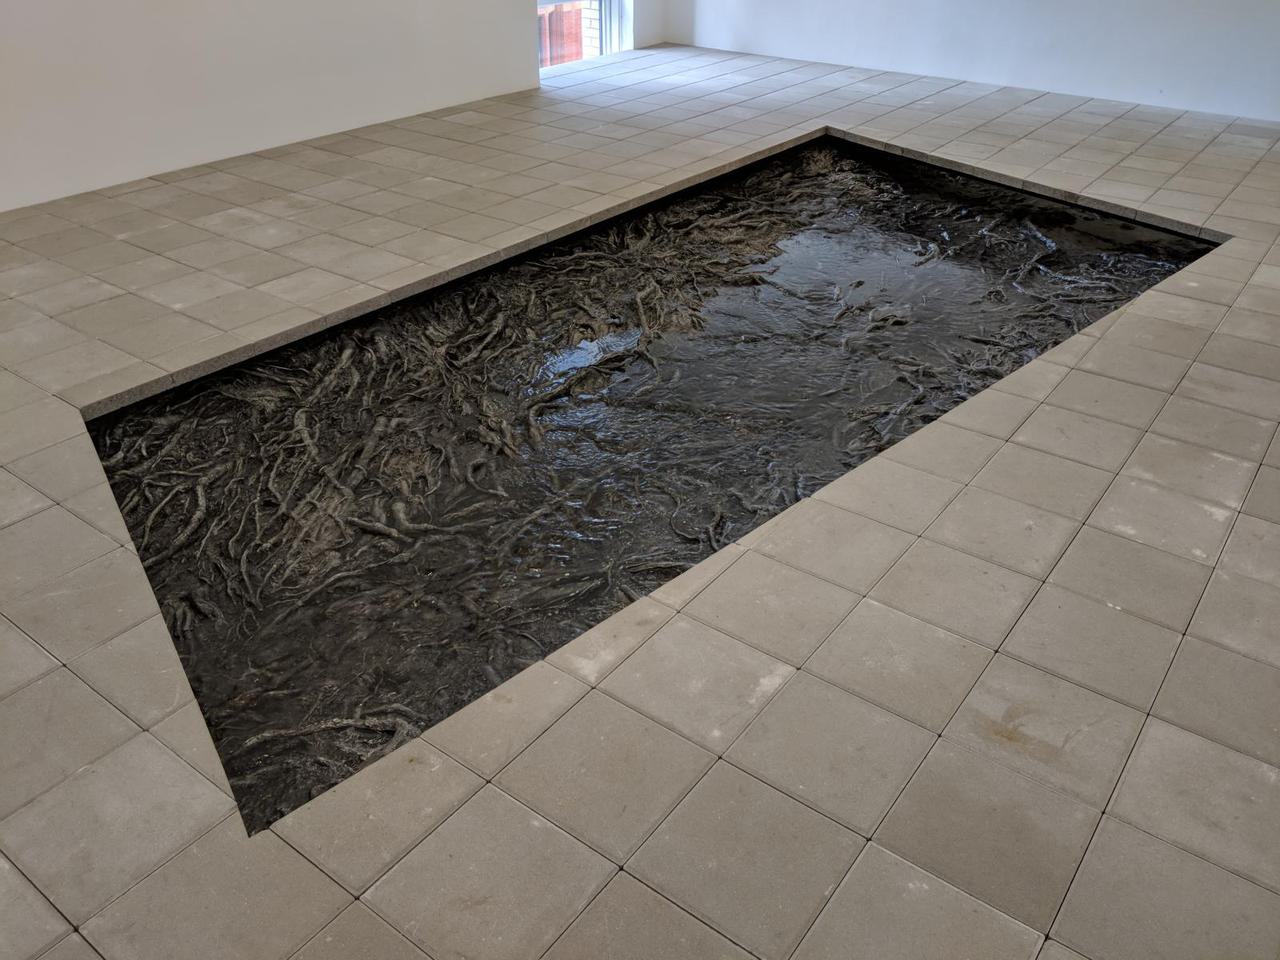 stone tile floor with large rectangular hole in the center, with a metal surface that looks organic, like tree branches or roots.